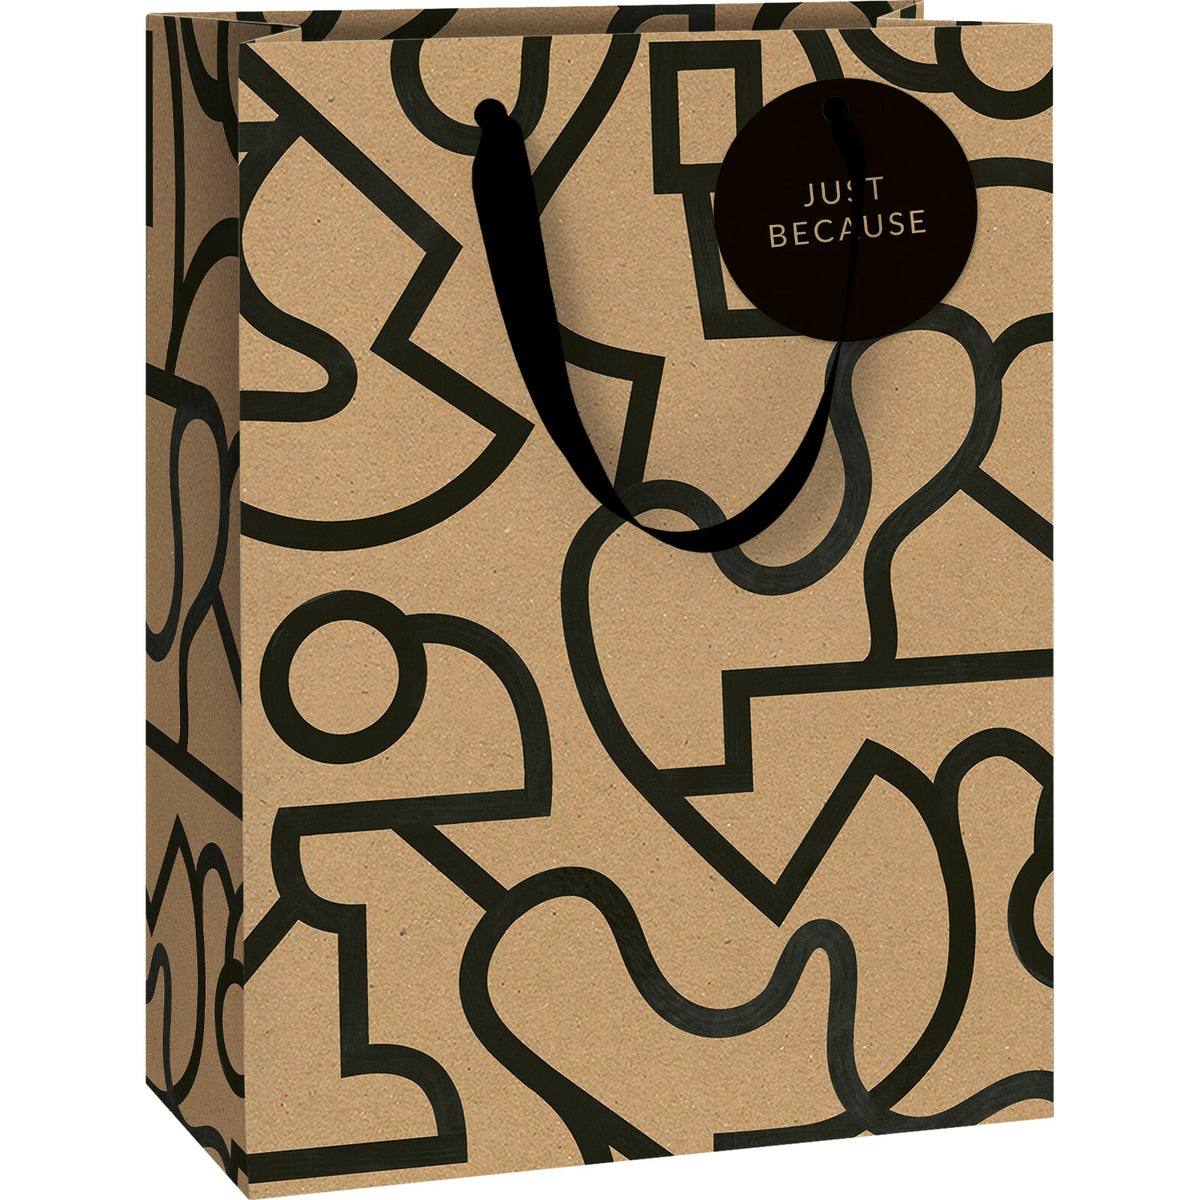 Taio Artful Large Gift Bag by penny black